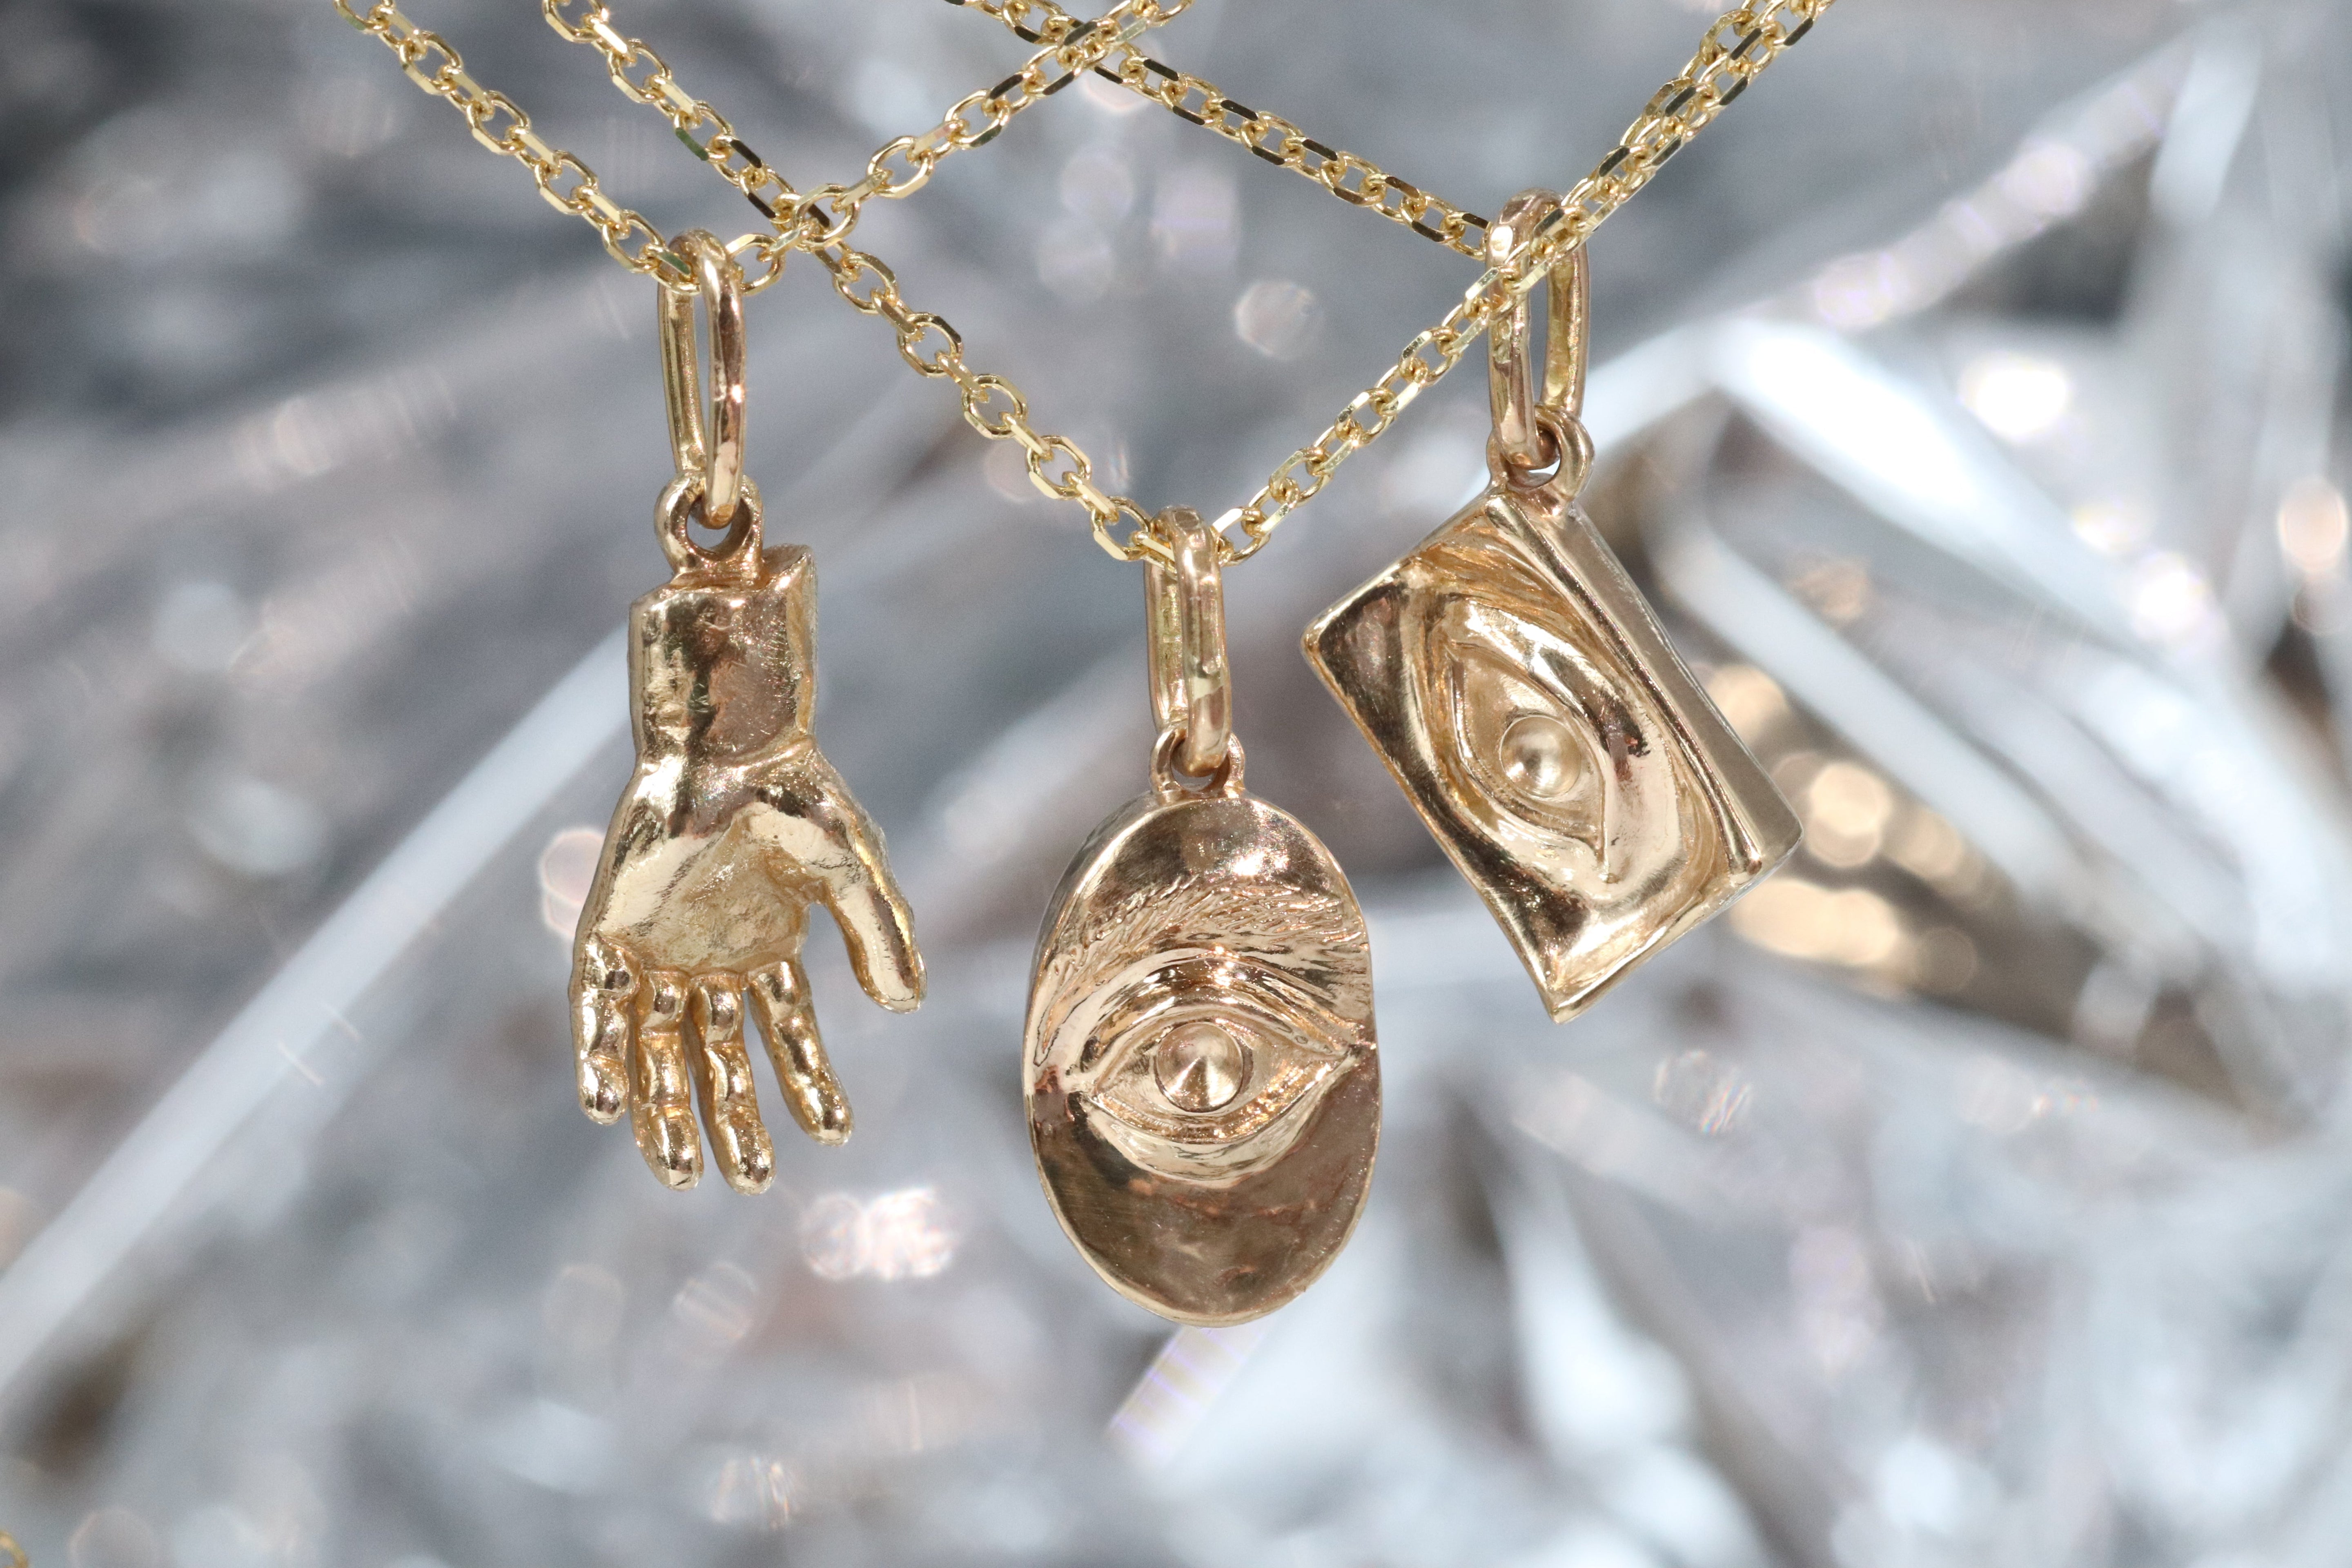 Group shout of Theia Pendant, Intagliaux Oval Pendant, and Intagliaux Pendant